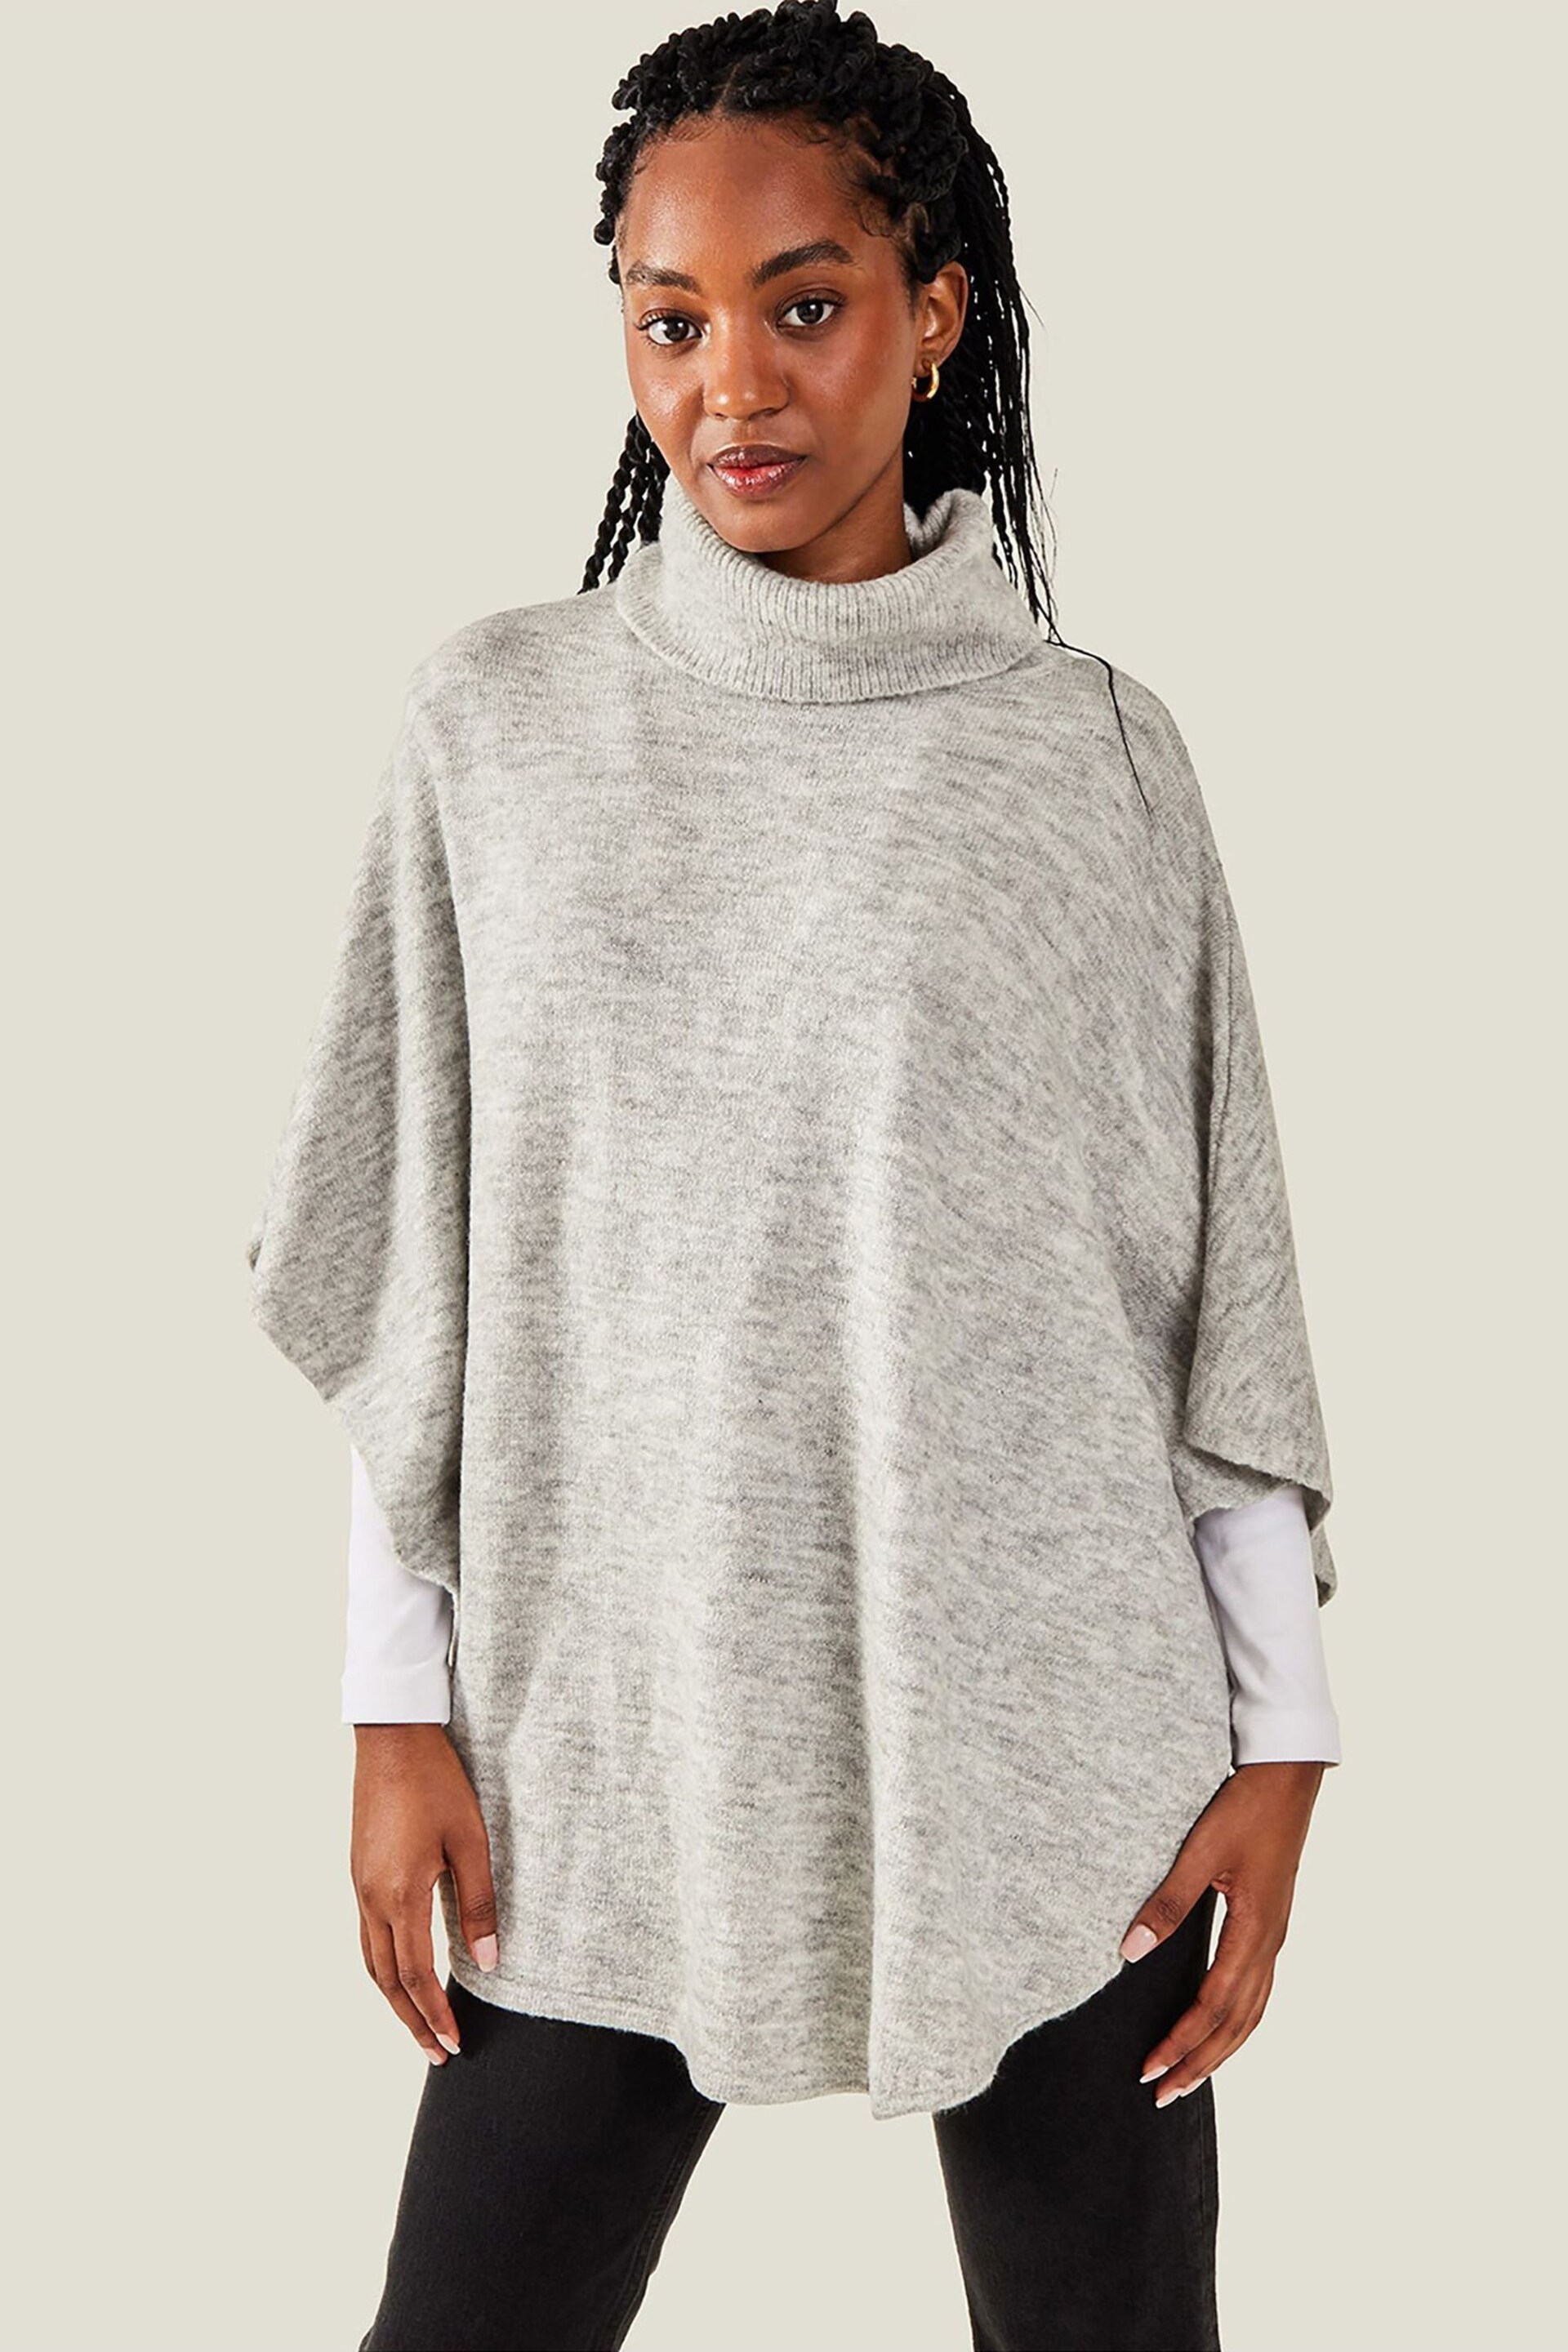 Accessorize Grey Cosy Knit Poncho - Image 1 of 4